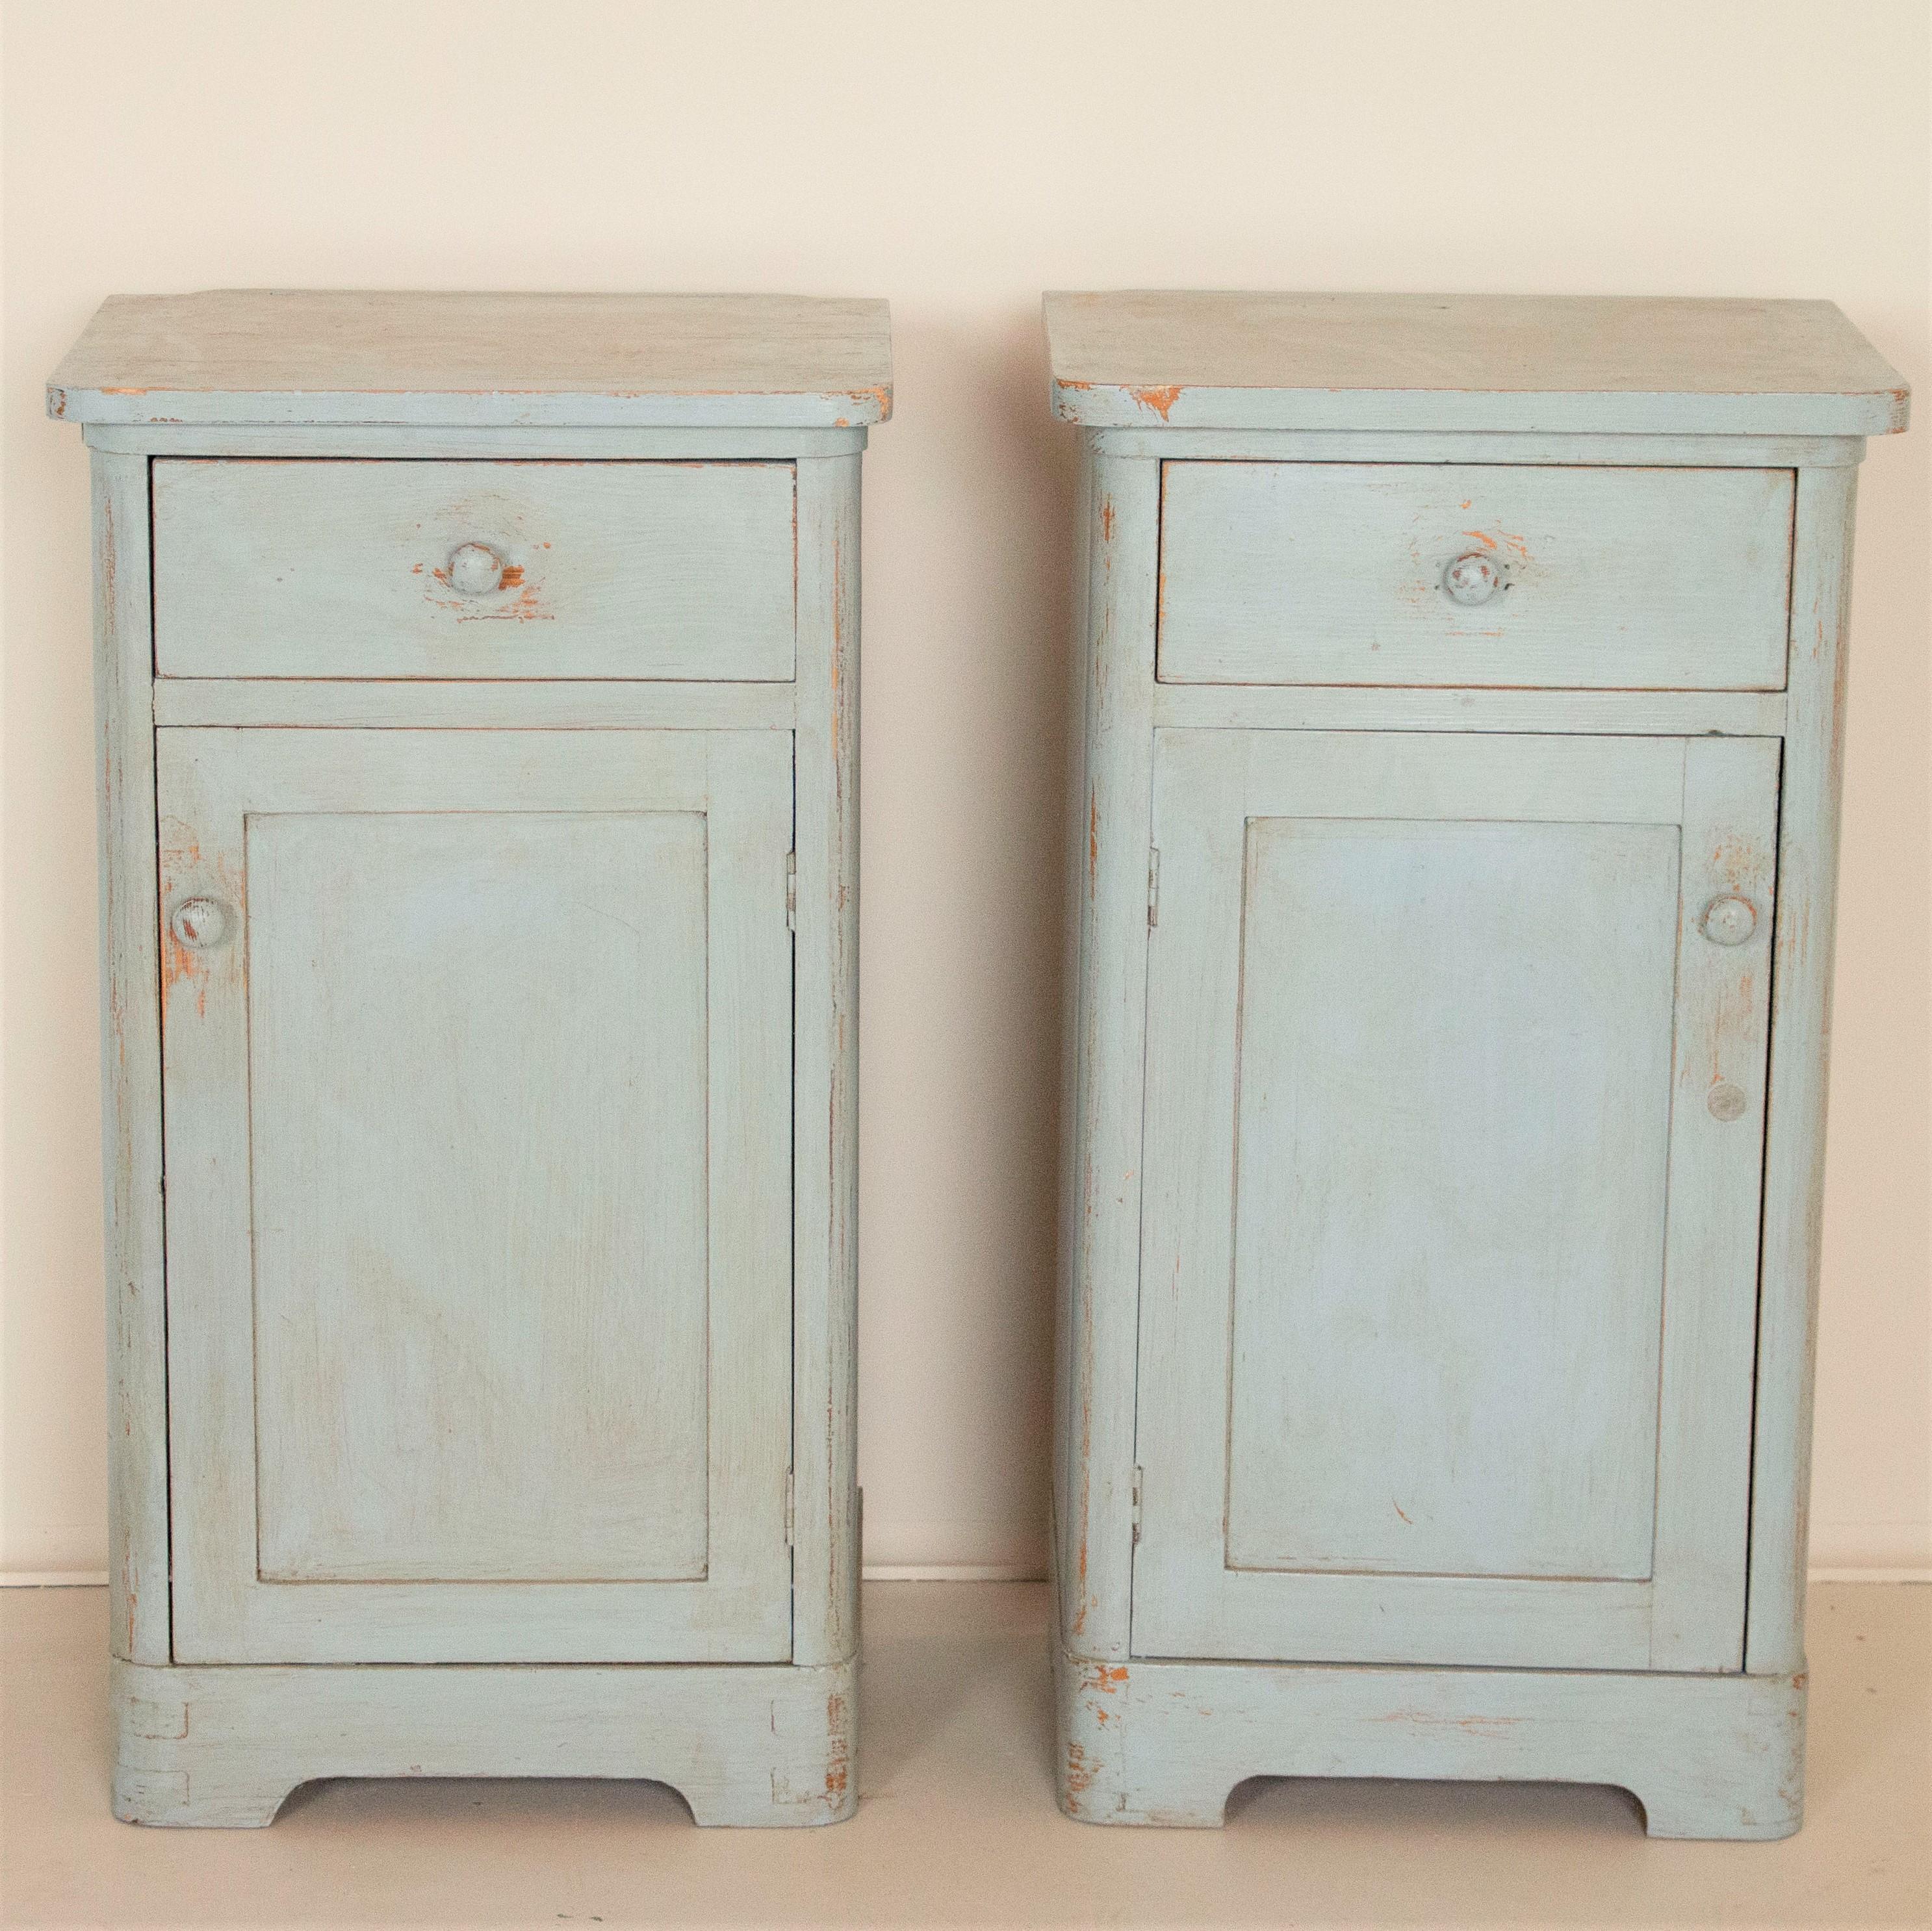 The light blue paint is all original in this pair of narrow nightstands. Perfect for use in a small room, the soft color is perfect for a variety of styles including cottage, farm house, coastal farmhouse or simply a guest or childs room. They have